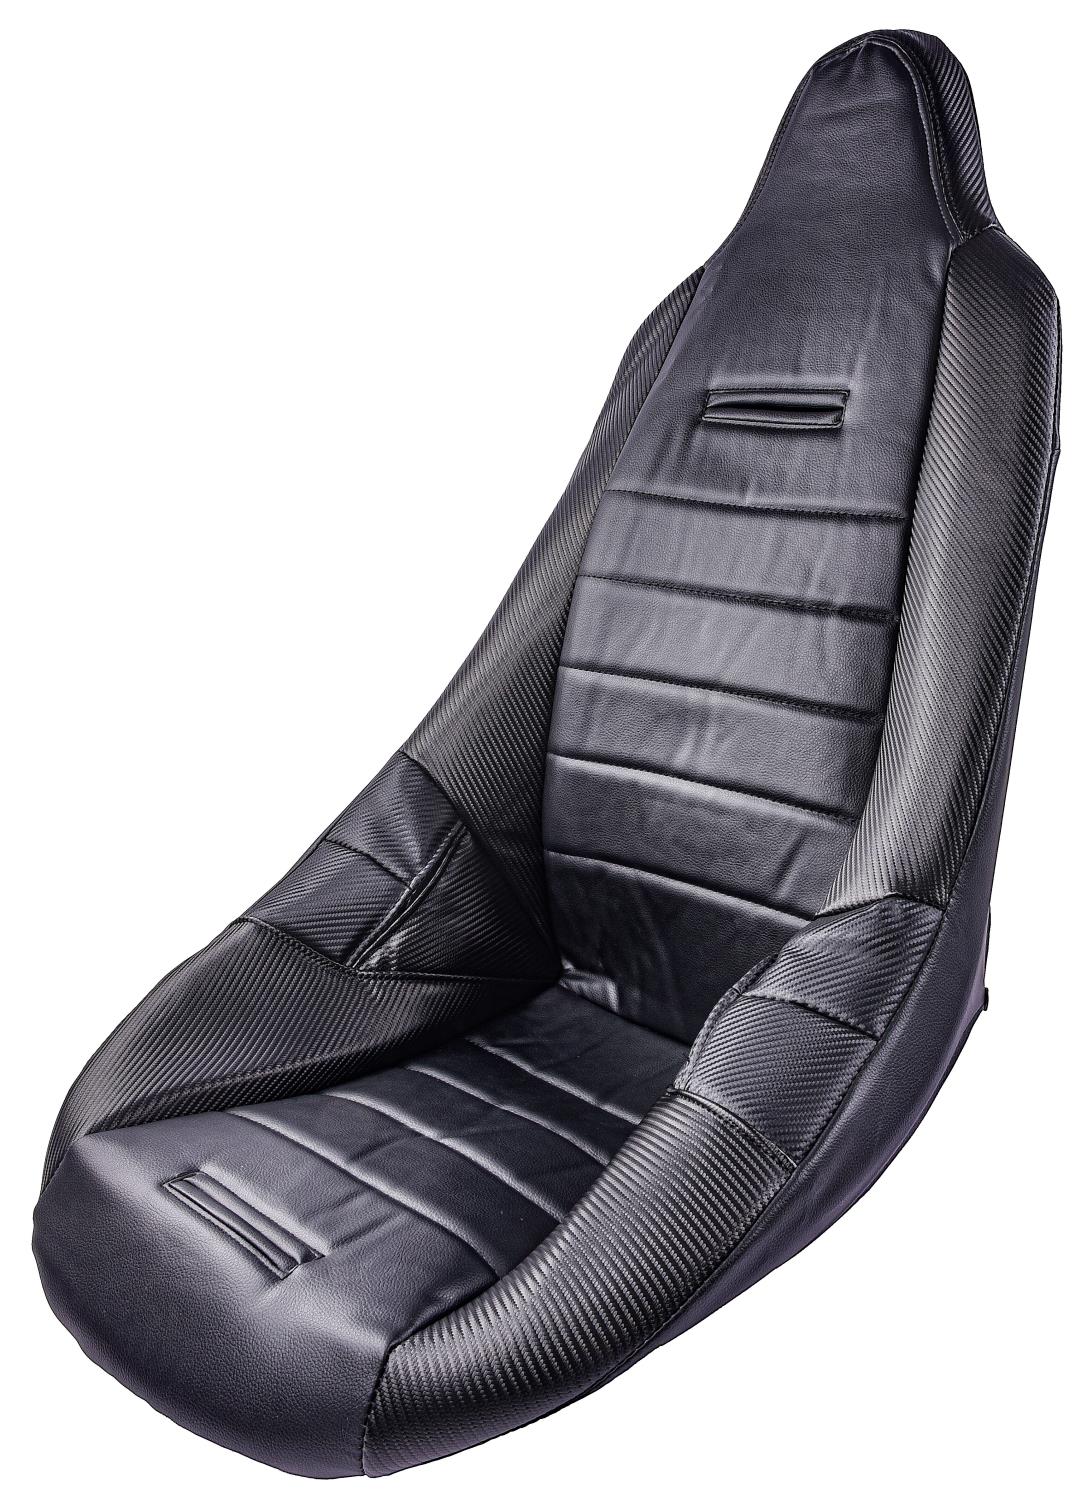 Pro High Back Custom Seat Cover Black with